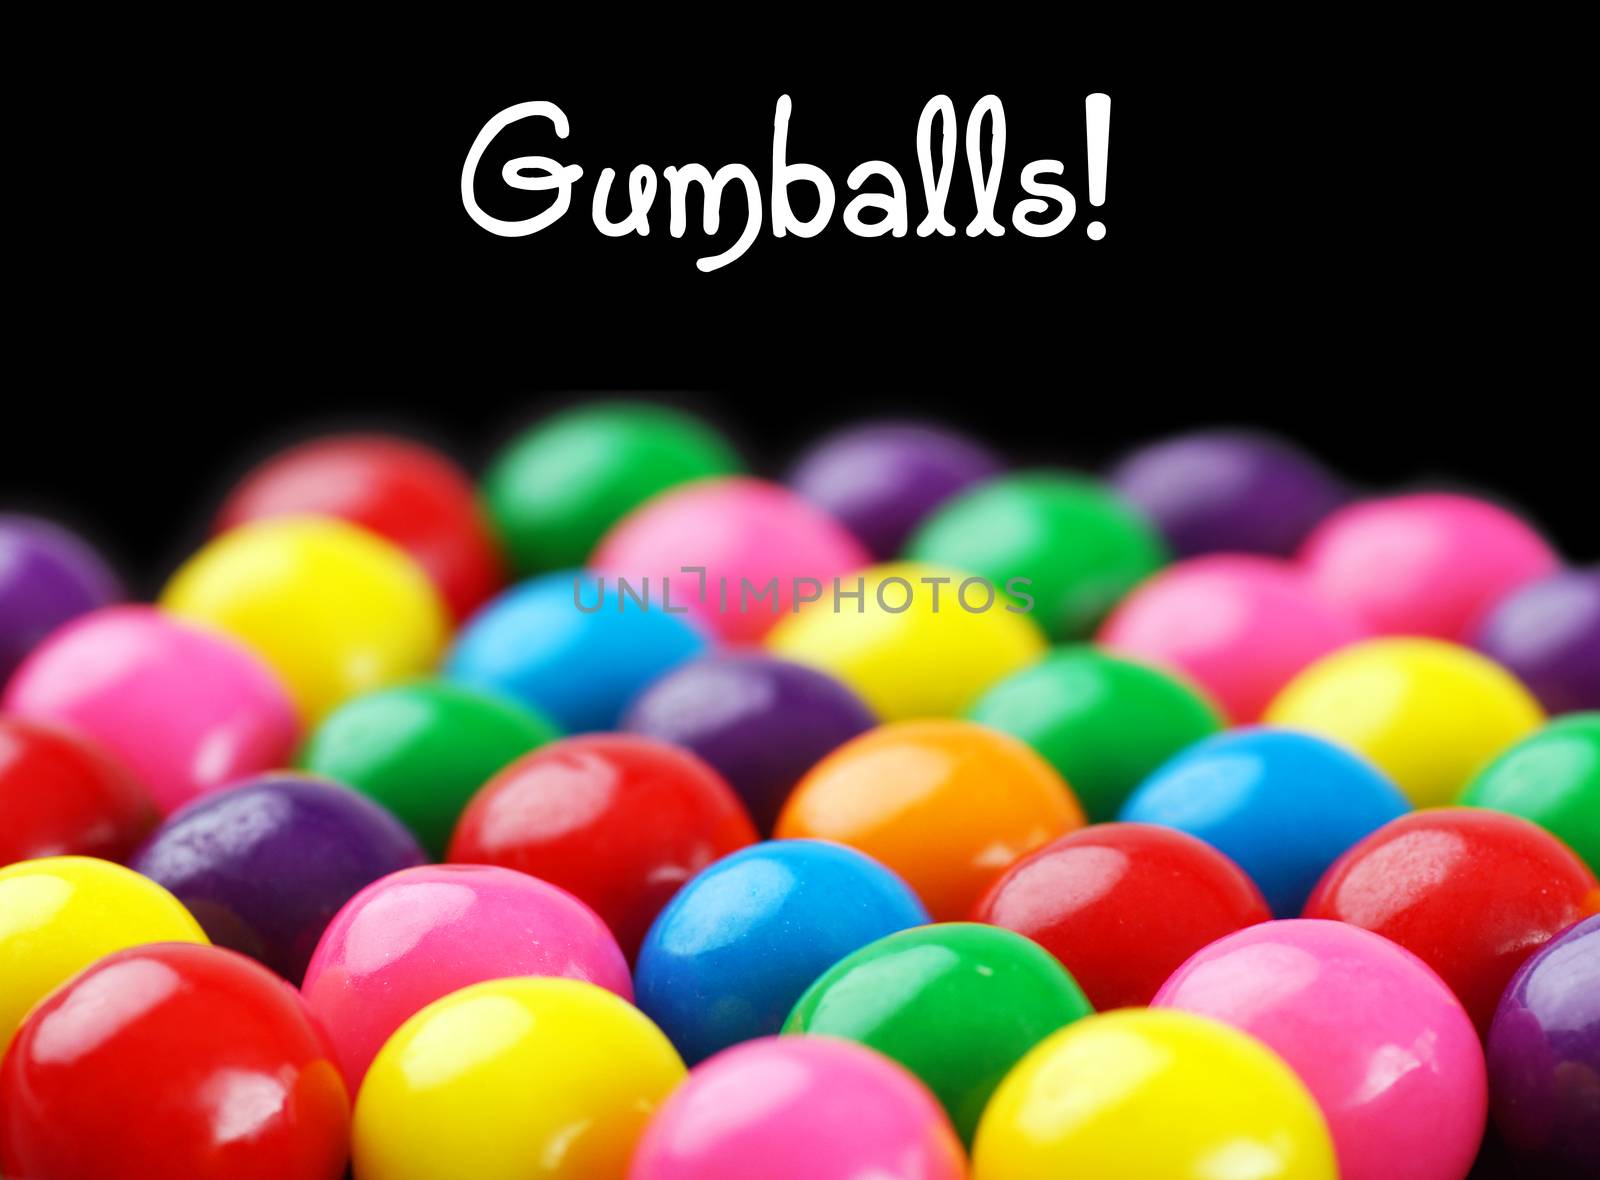 Fun and colorful gumballs on black background with text